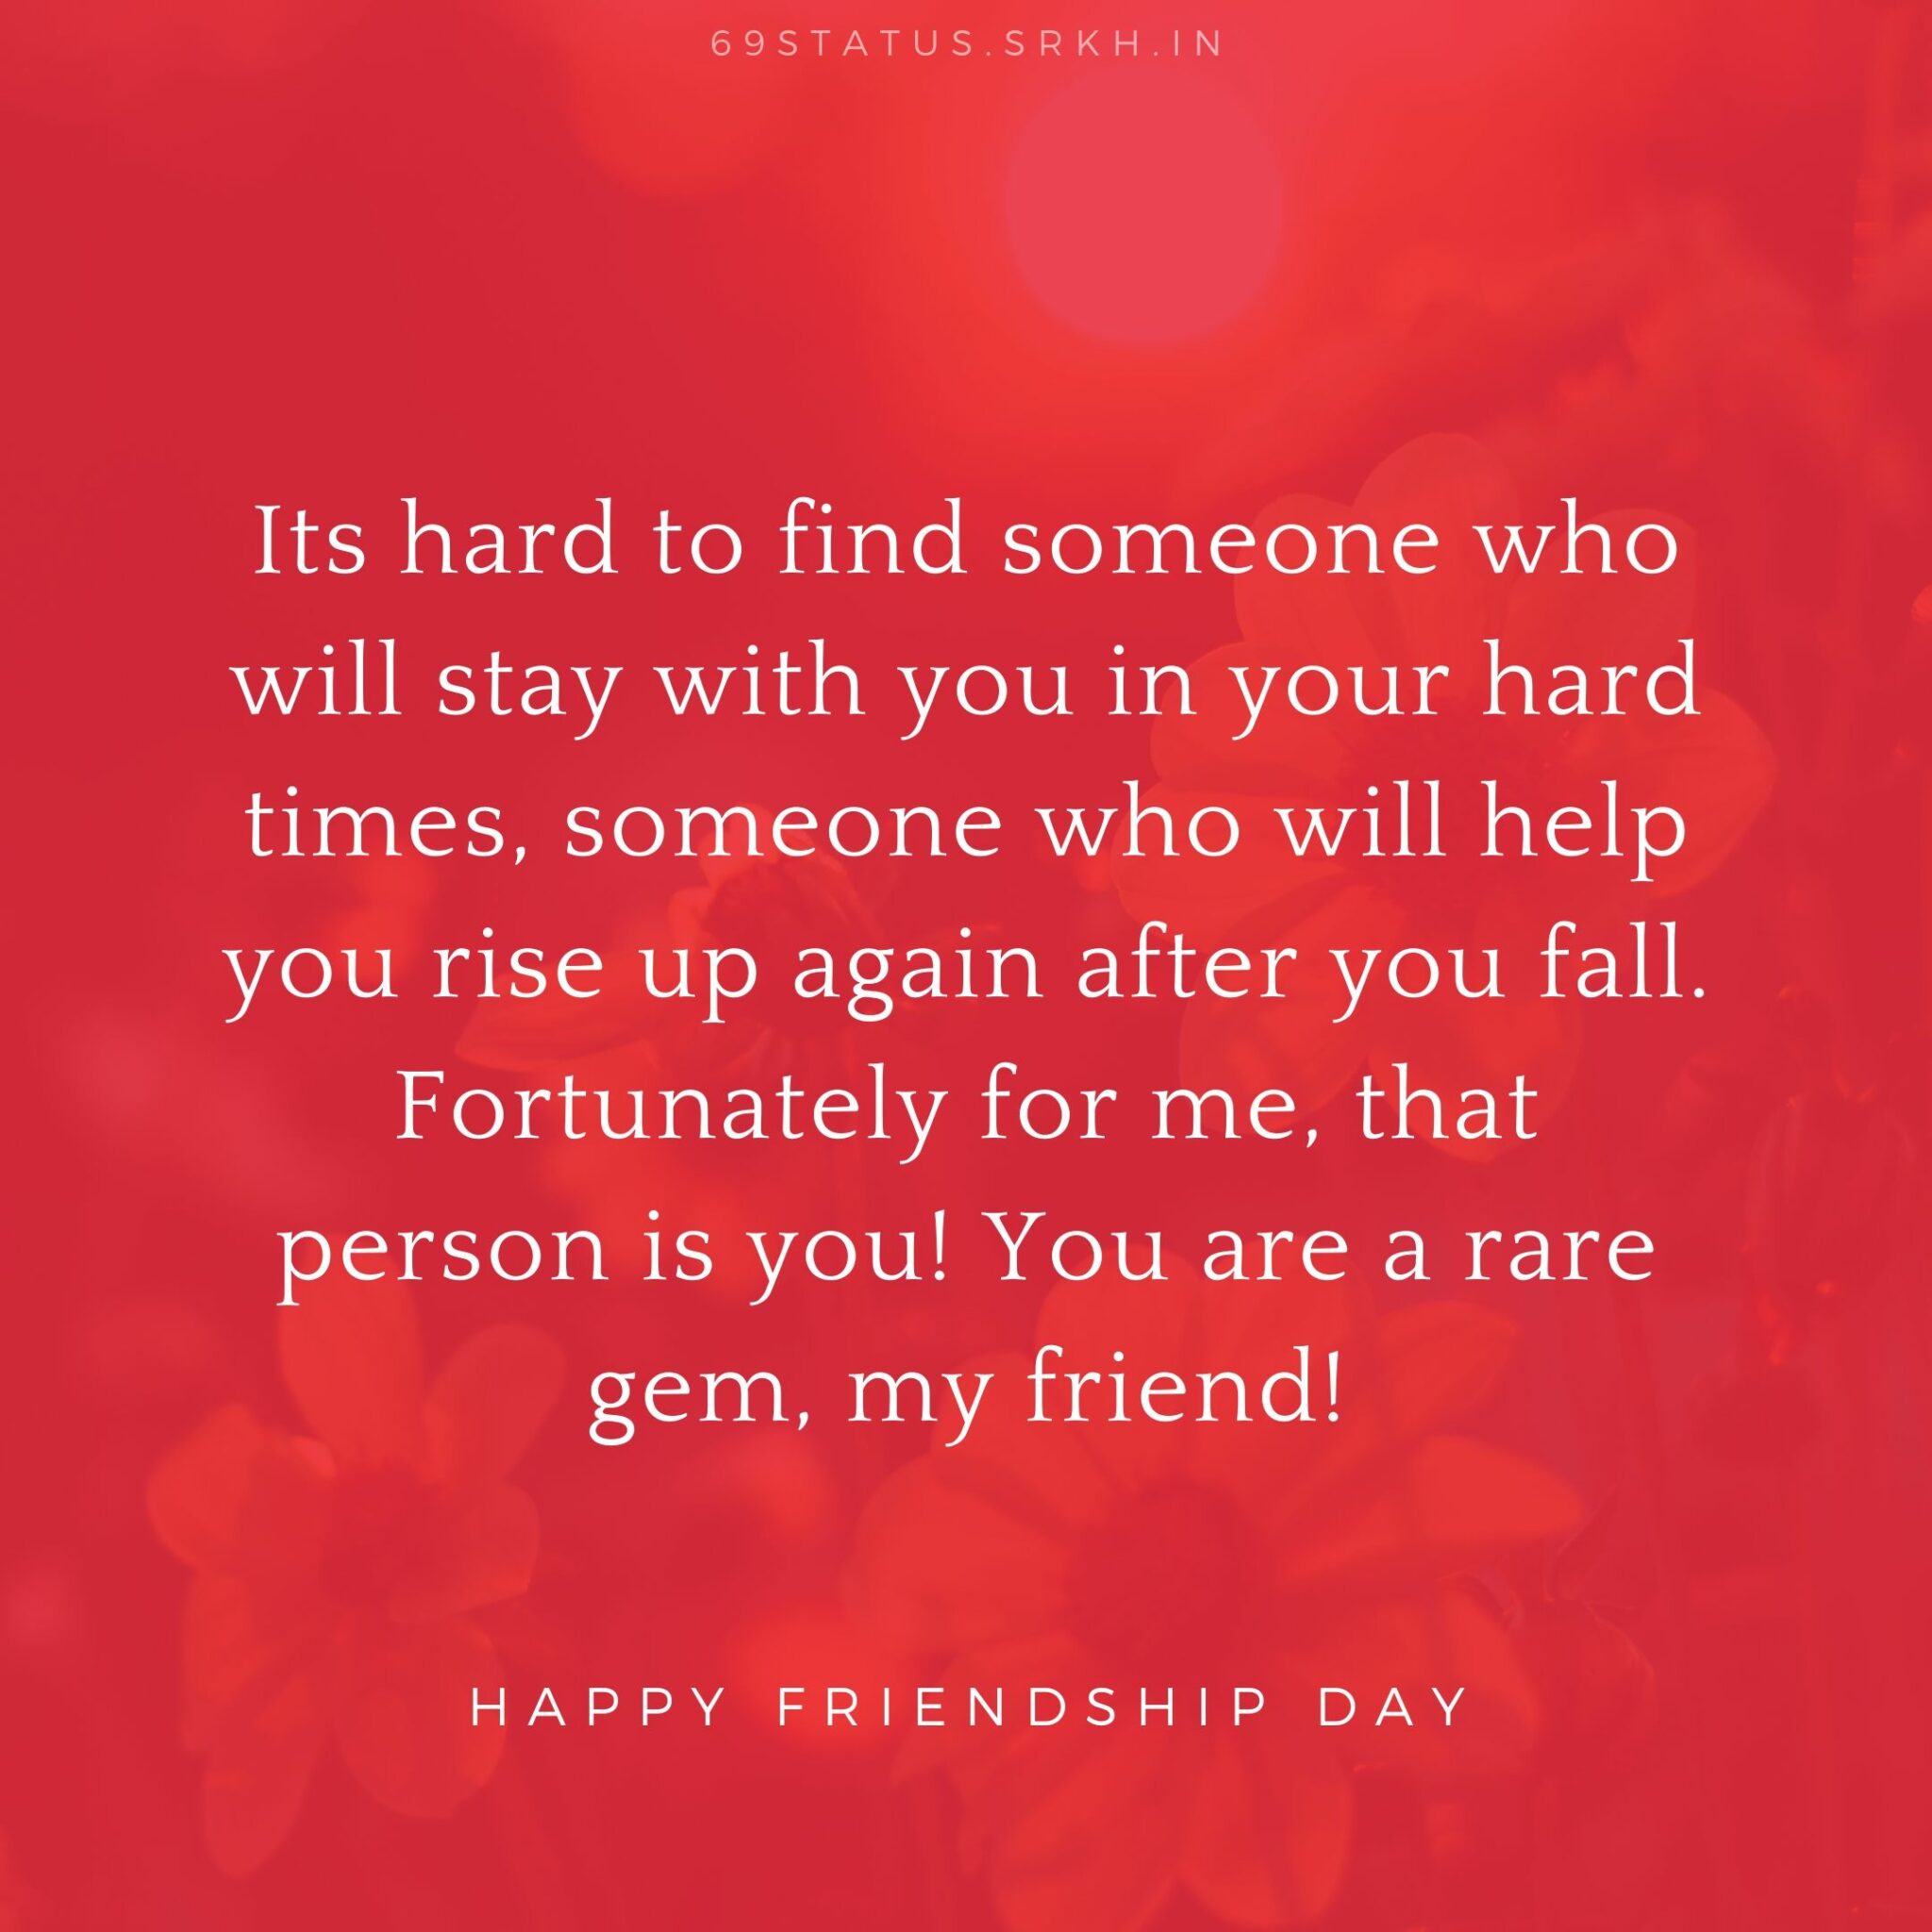 Friendship Day Image Quotes